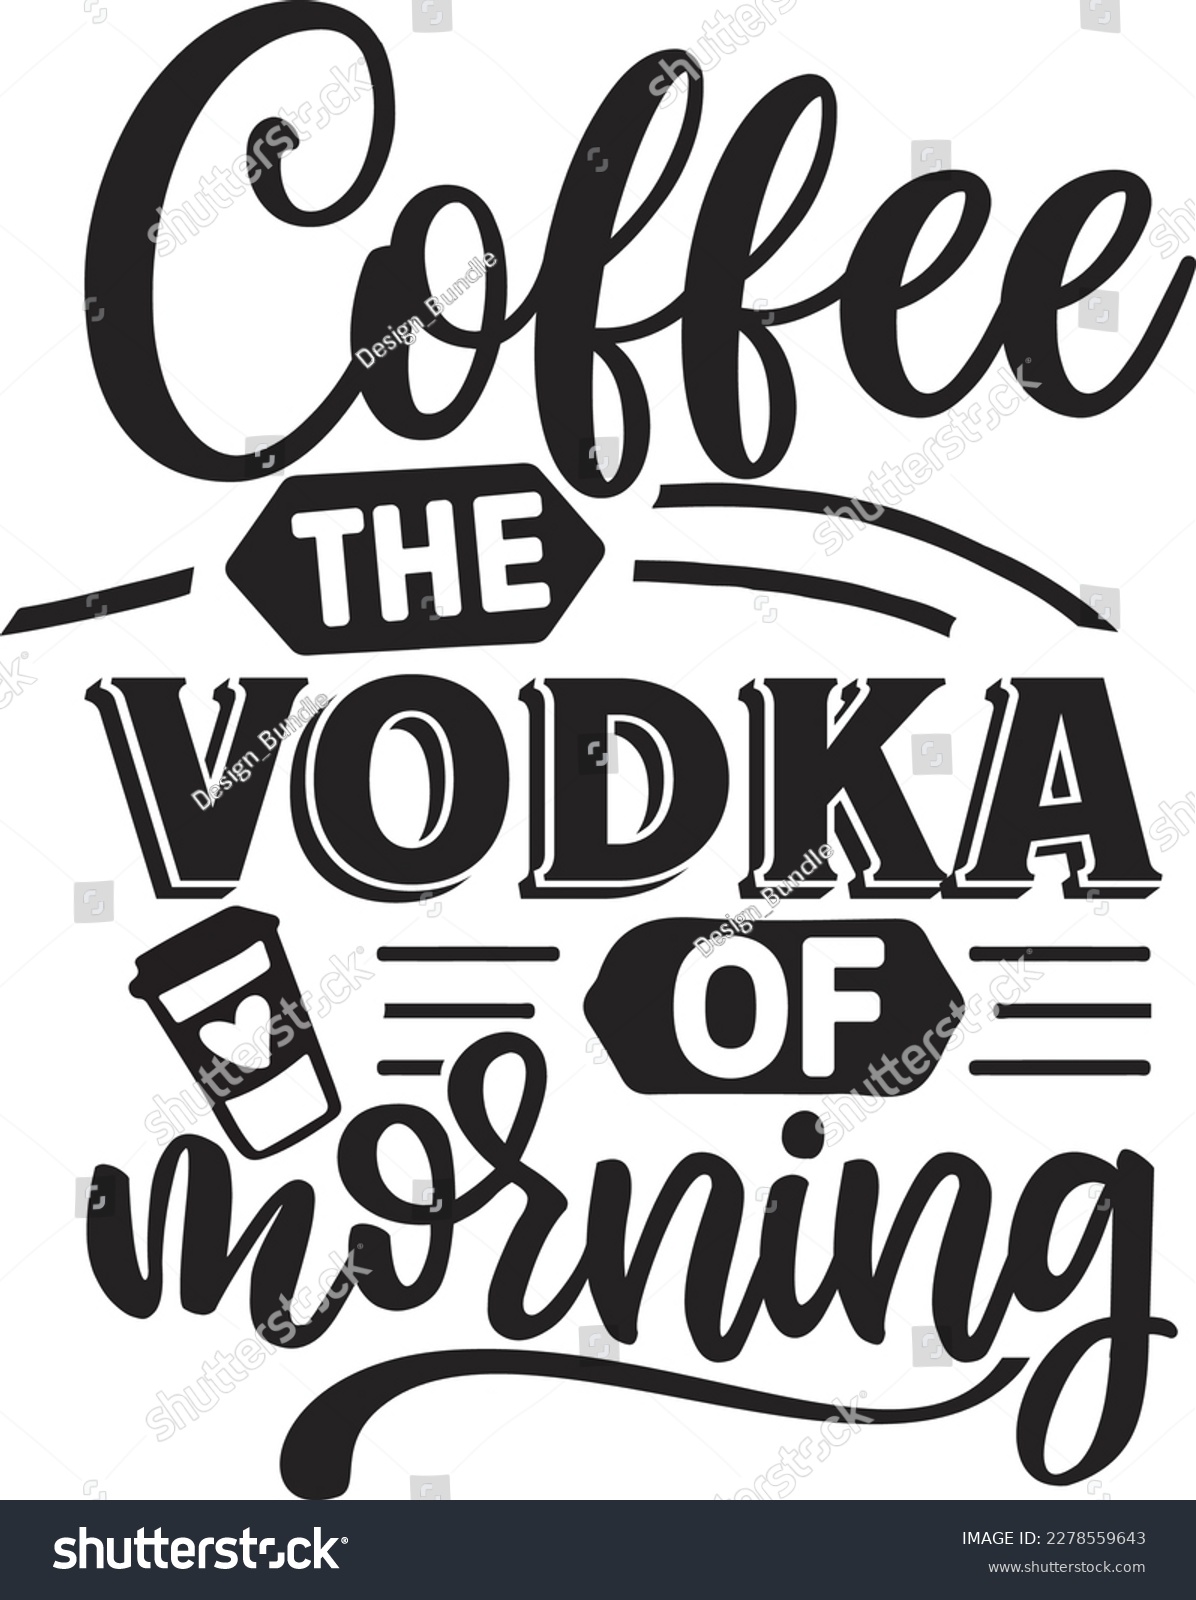 SVG of coffee the vodka of morning svg ,coffee SVG design, coffee SVG bundle, coffee design, svg